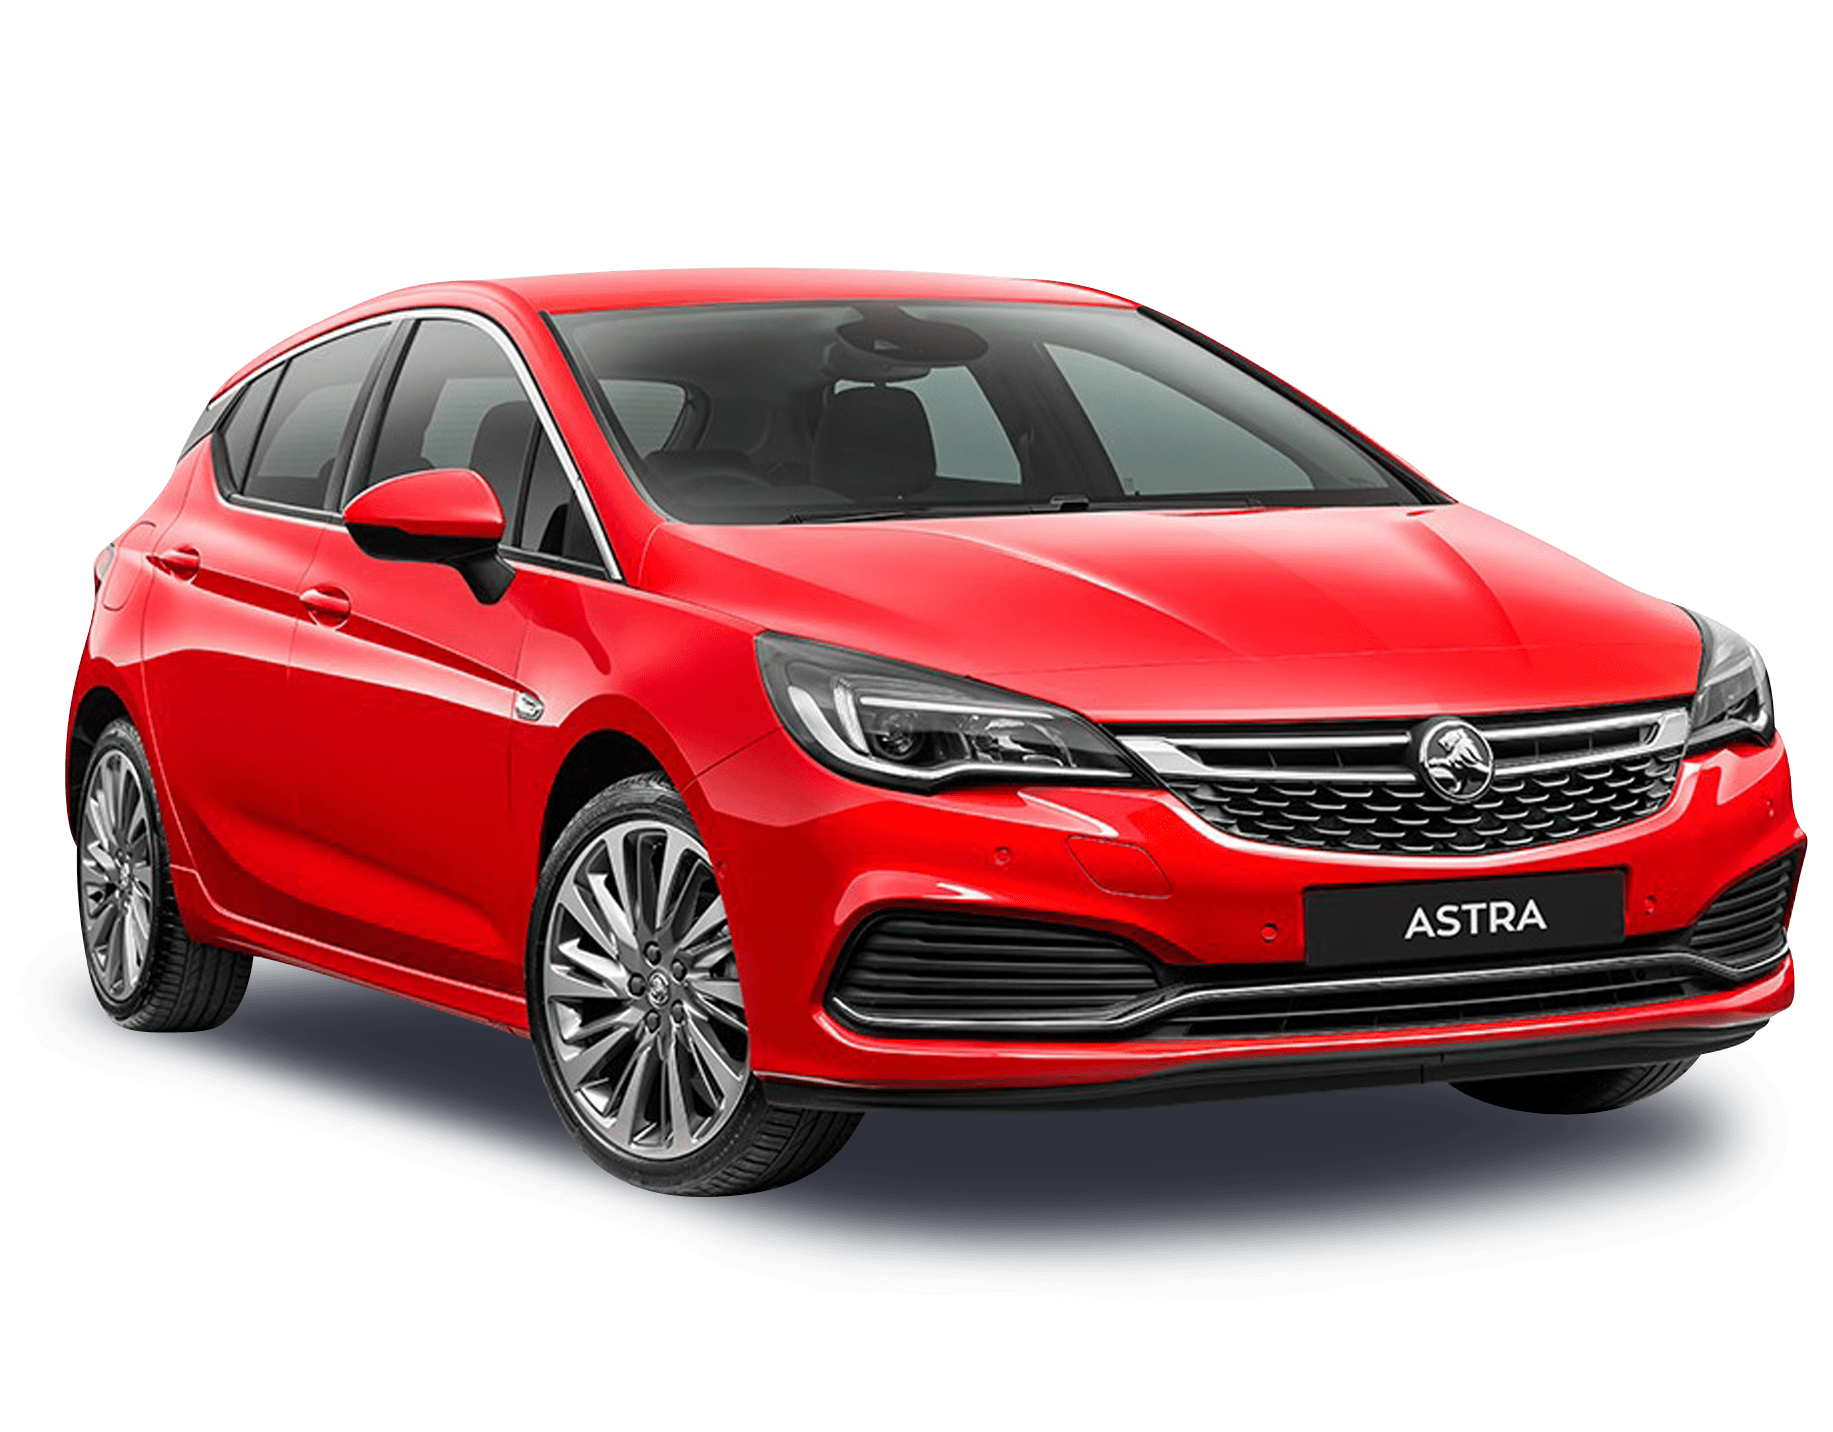 https://carsguide-res.cloudinary.com/image/upload/f_auto,fl_lossy,q_auto,t_default/v1/editorial/vhs/Holden-Astra_0.png